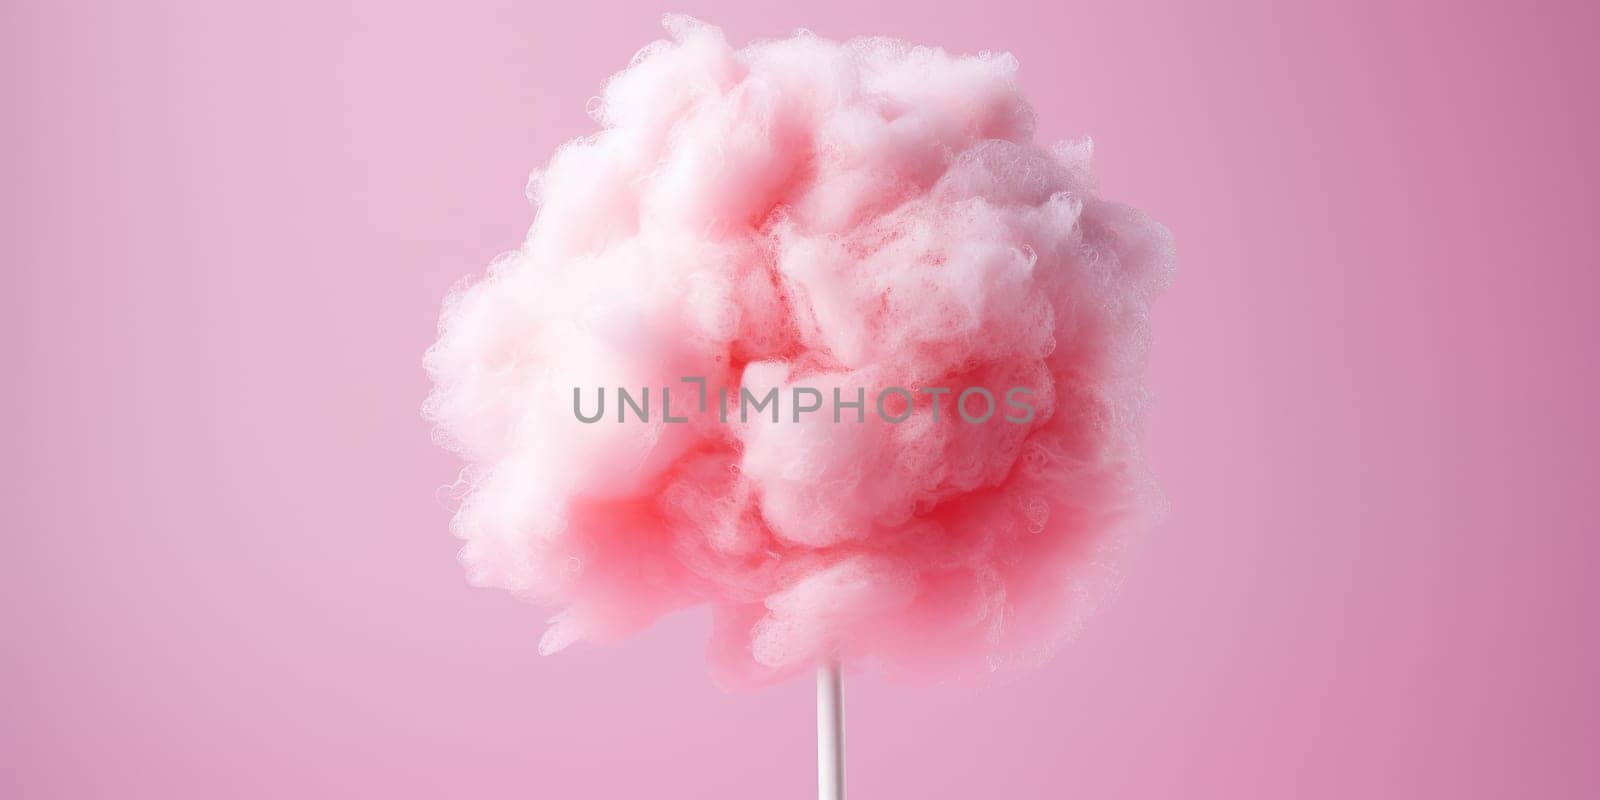 A pink candyfloss on the stick food, candy food concept by Kadula